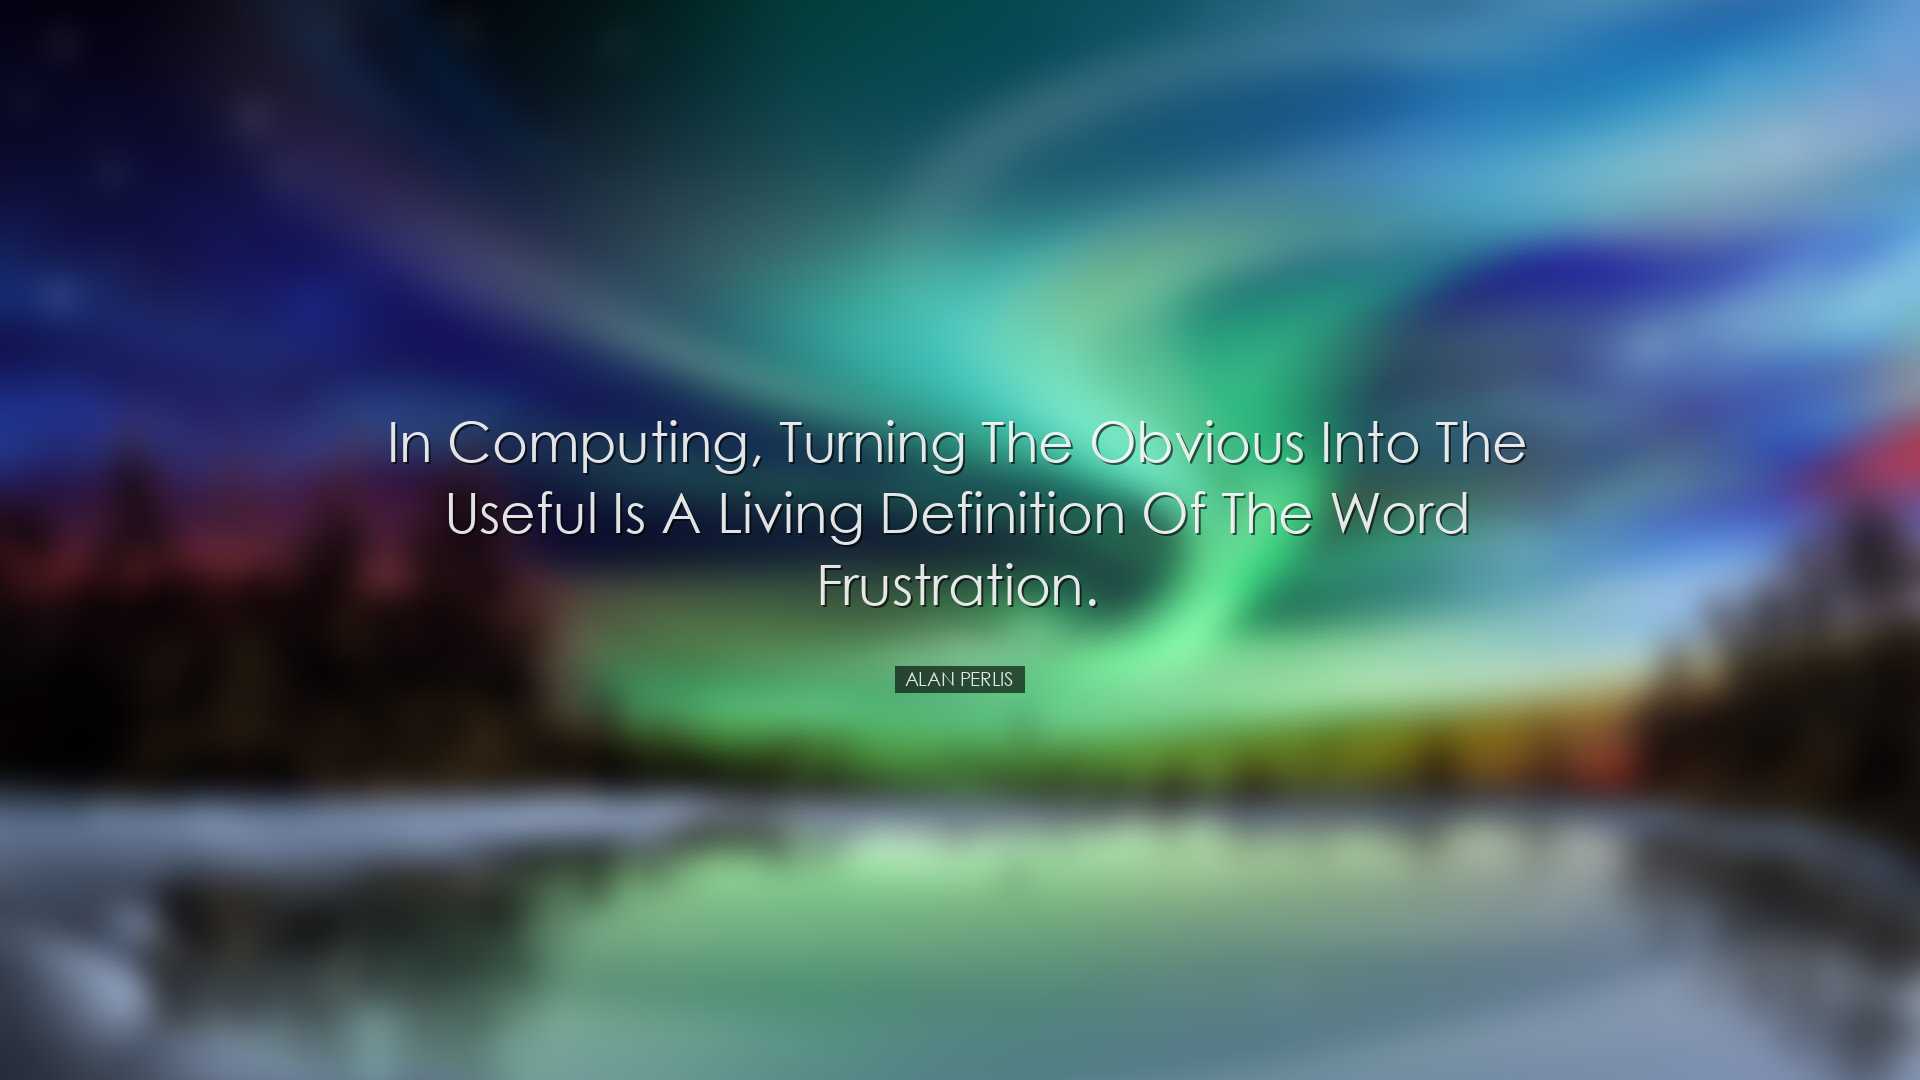 In computing, turning the obvious into the useful is a living defi